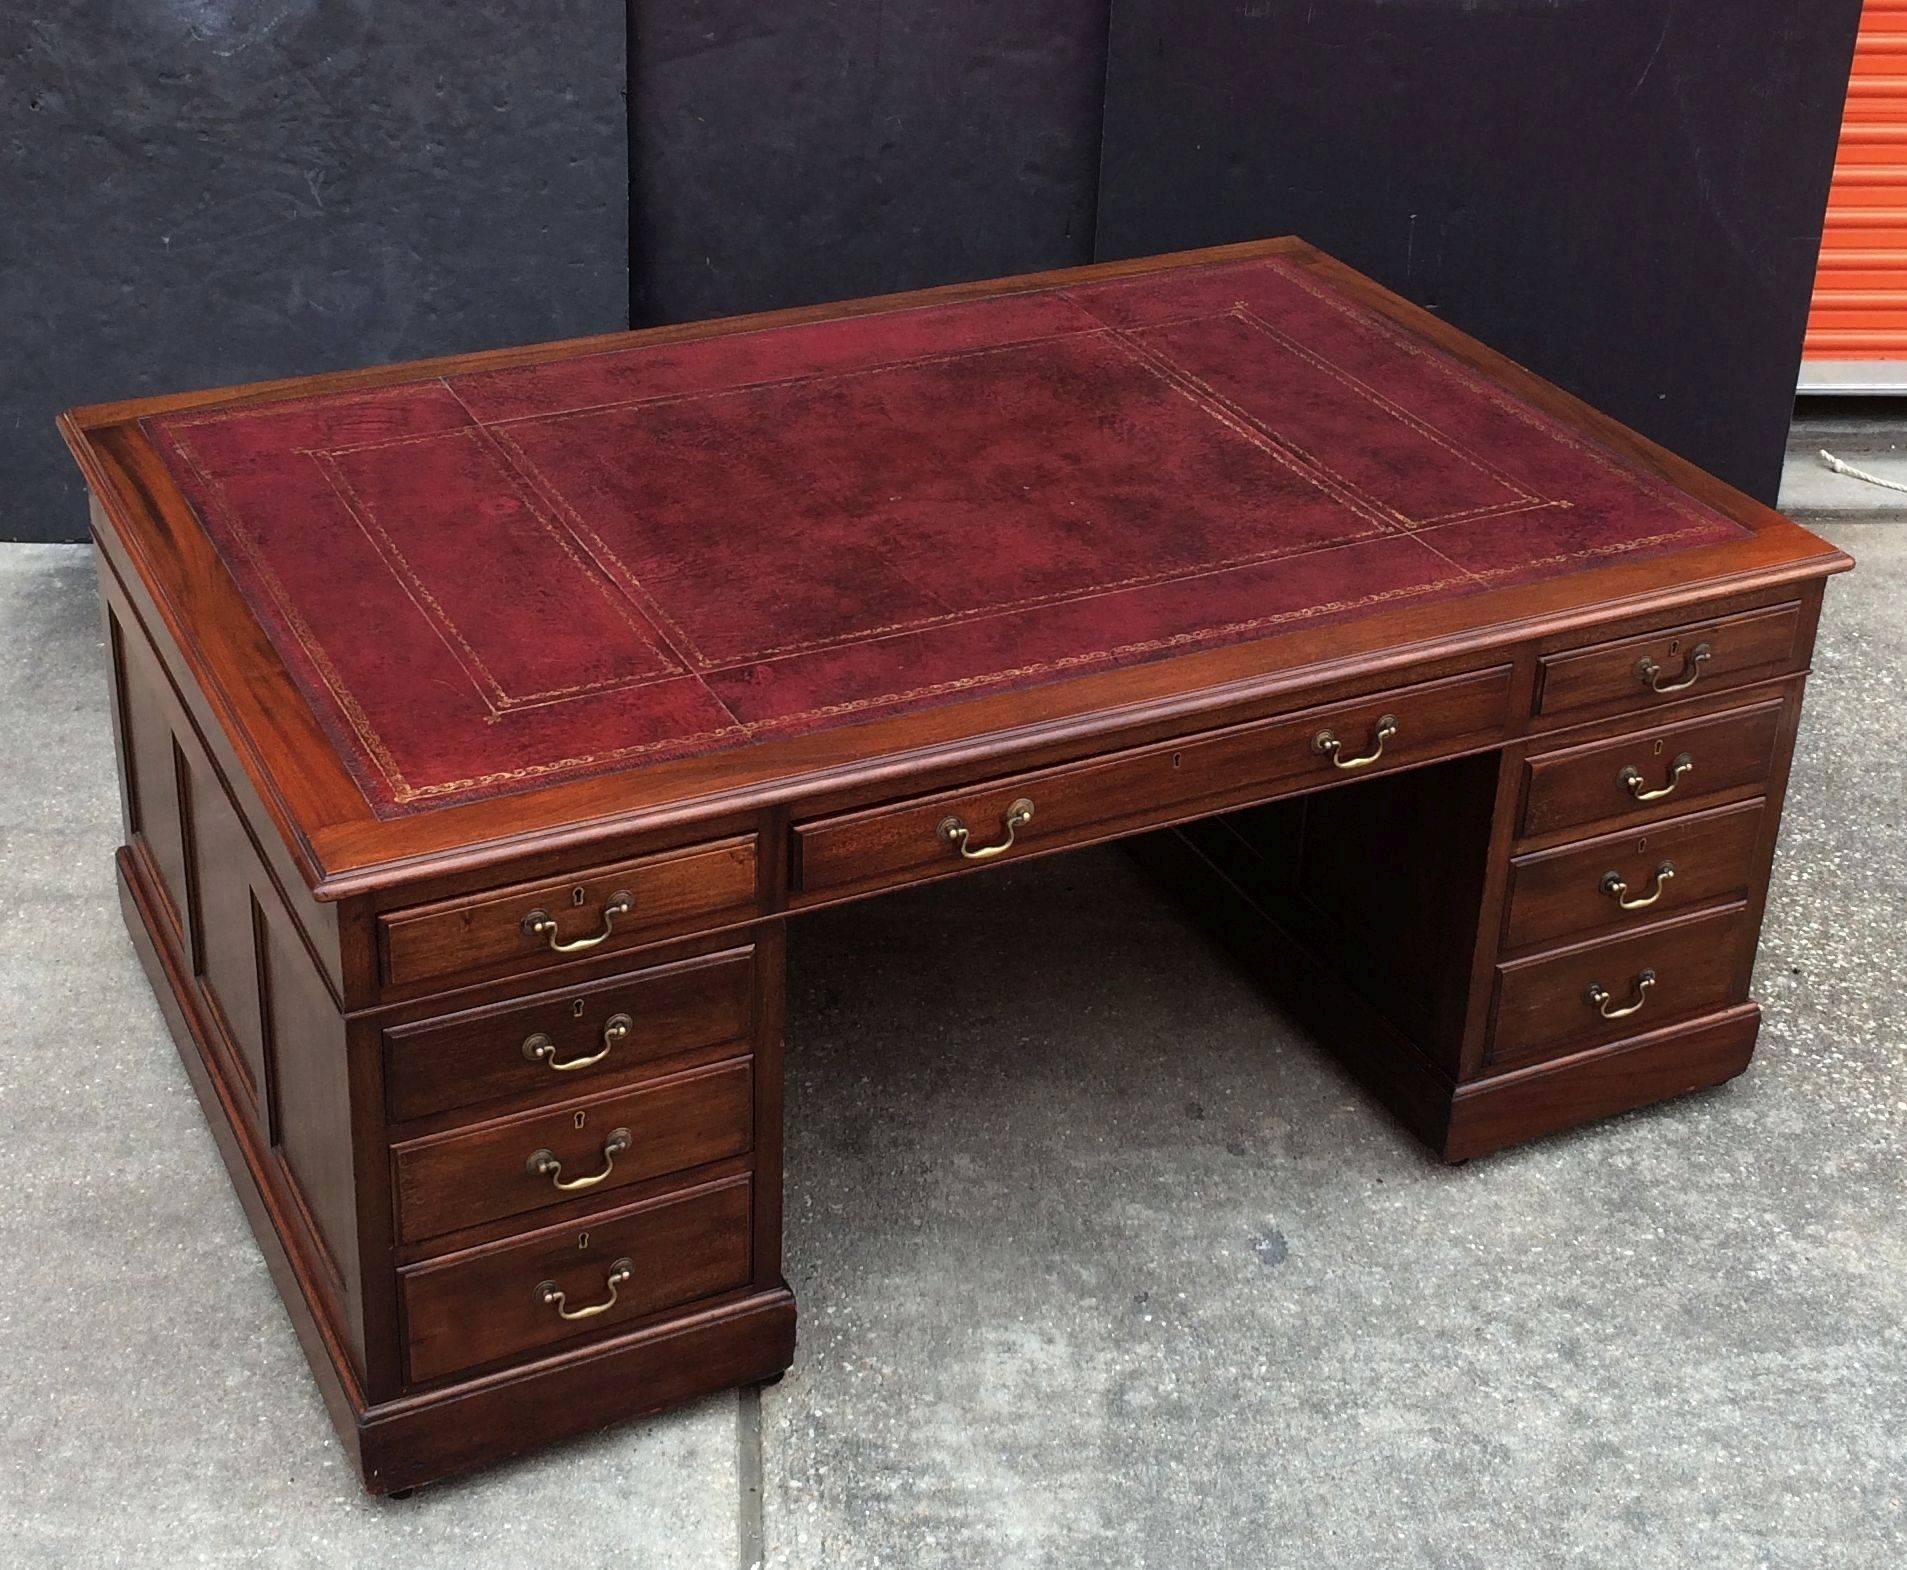 A fine large English partner's desk of mahogany, featuring a moulded top inset with a handsome gilt embossed red leather, over a long drawer flanked by two short drawers on opposing sides. 
One pedestal with three short drawers resting on raised